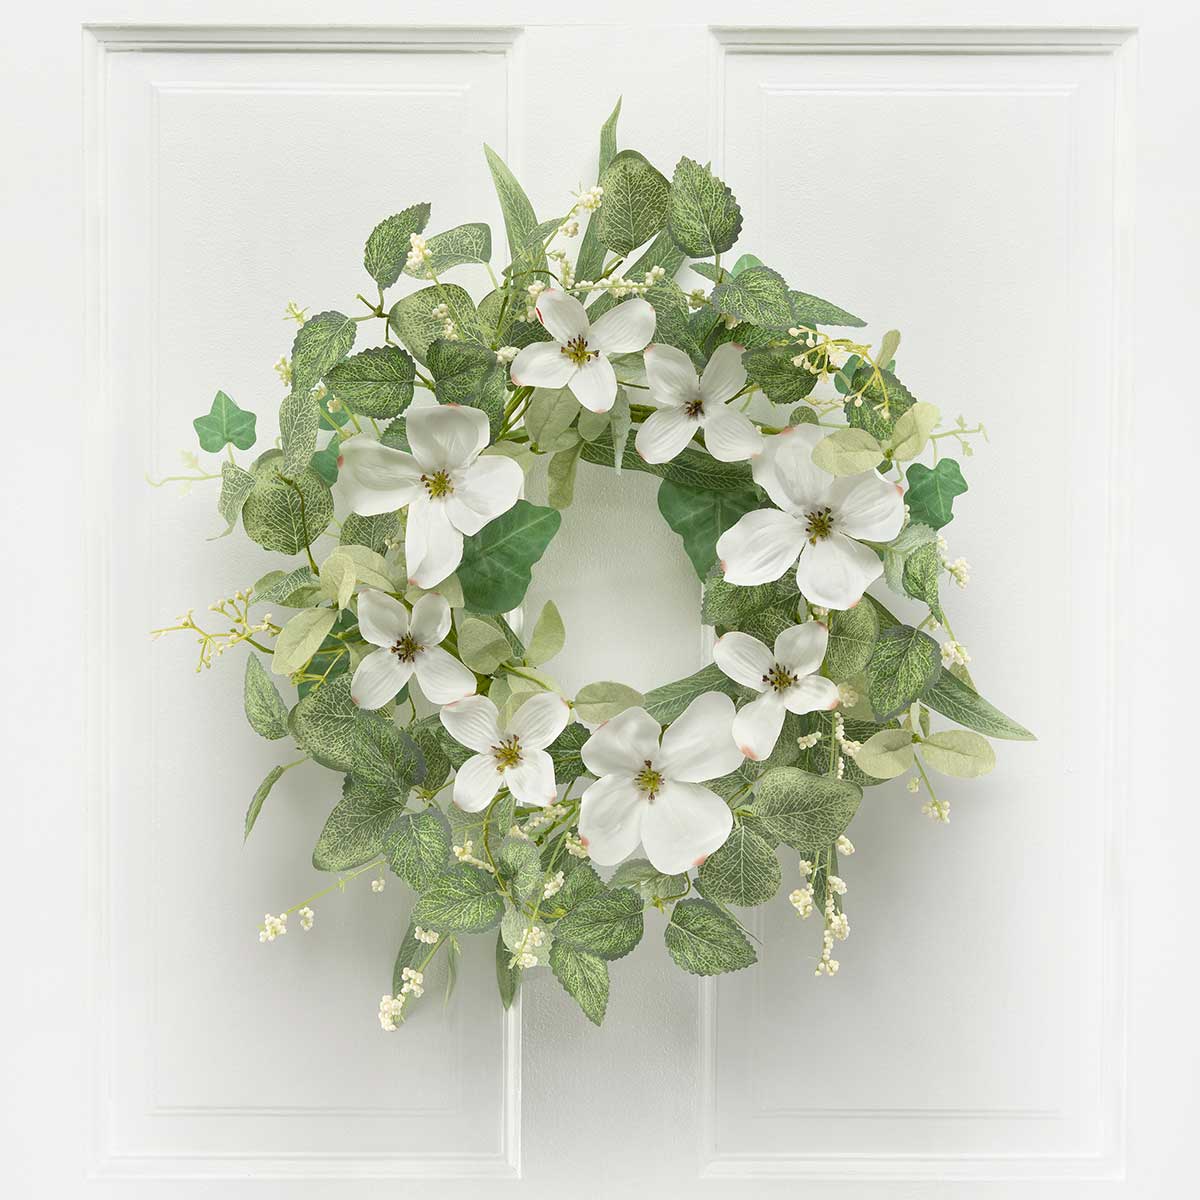 WREATH DOGWOOD/BERRY 16IN (INNER RING 7IN) POLYESTER